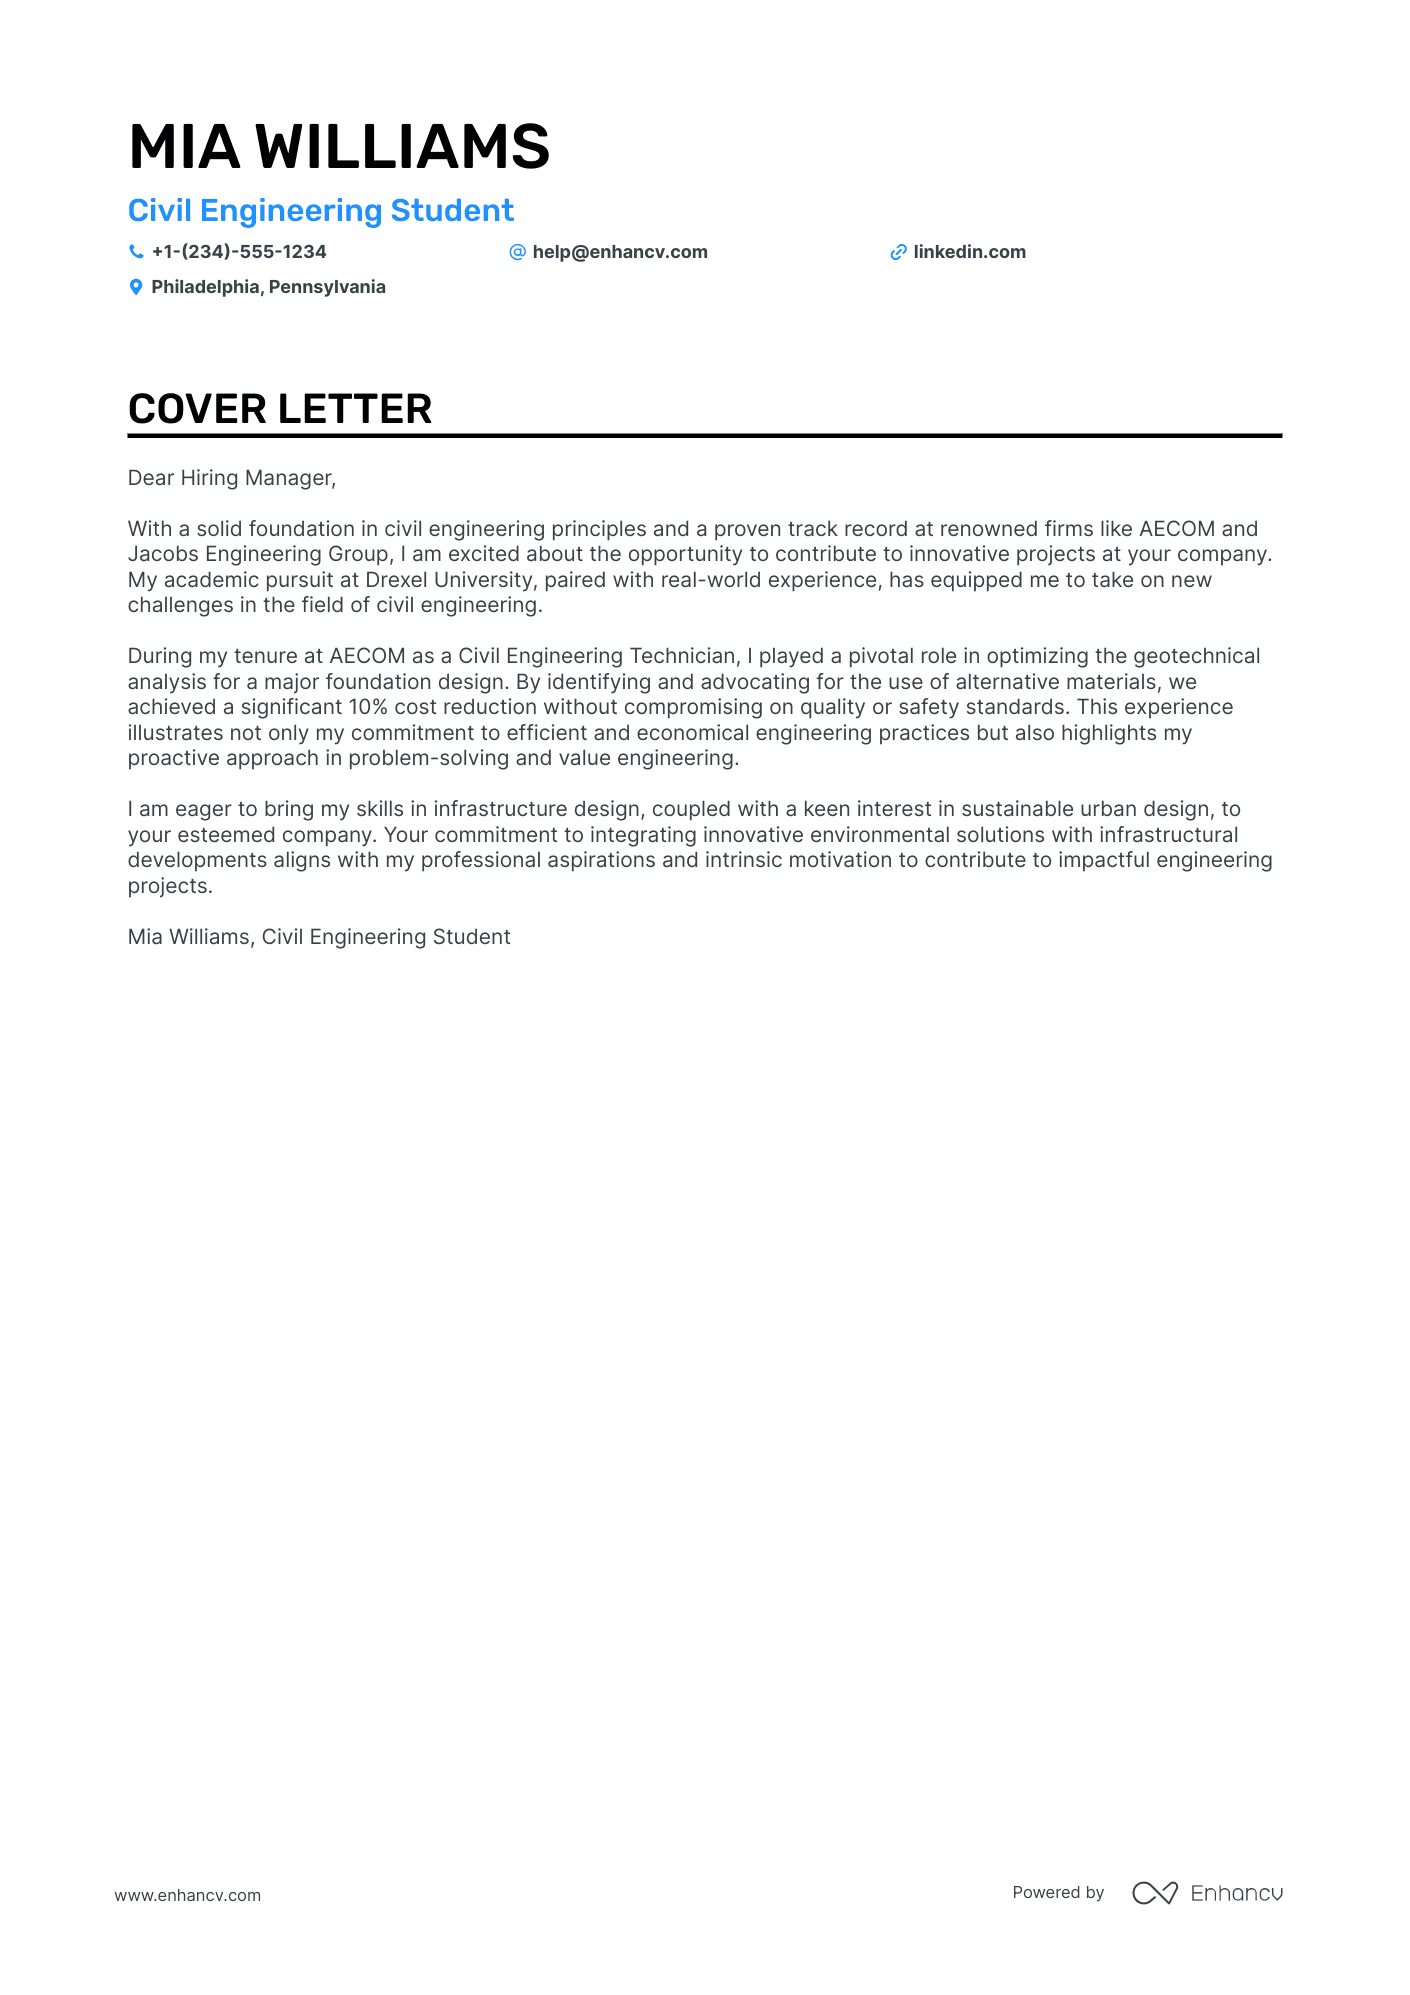 Engineering Student cover letter